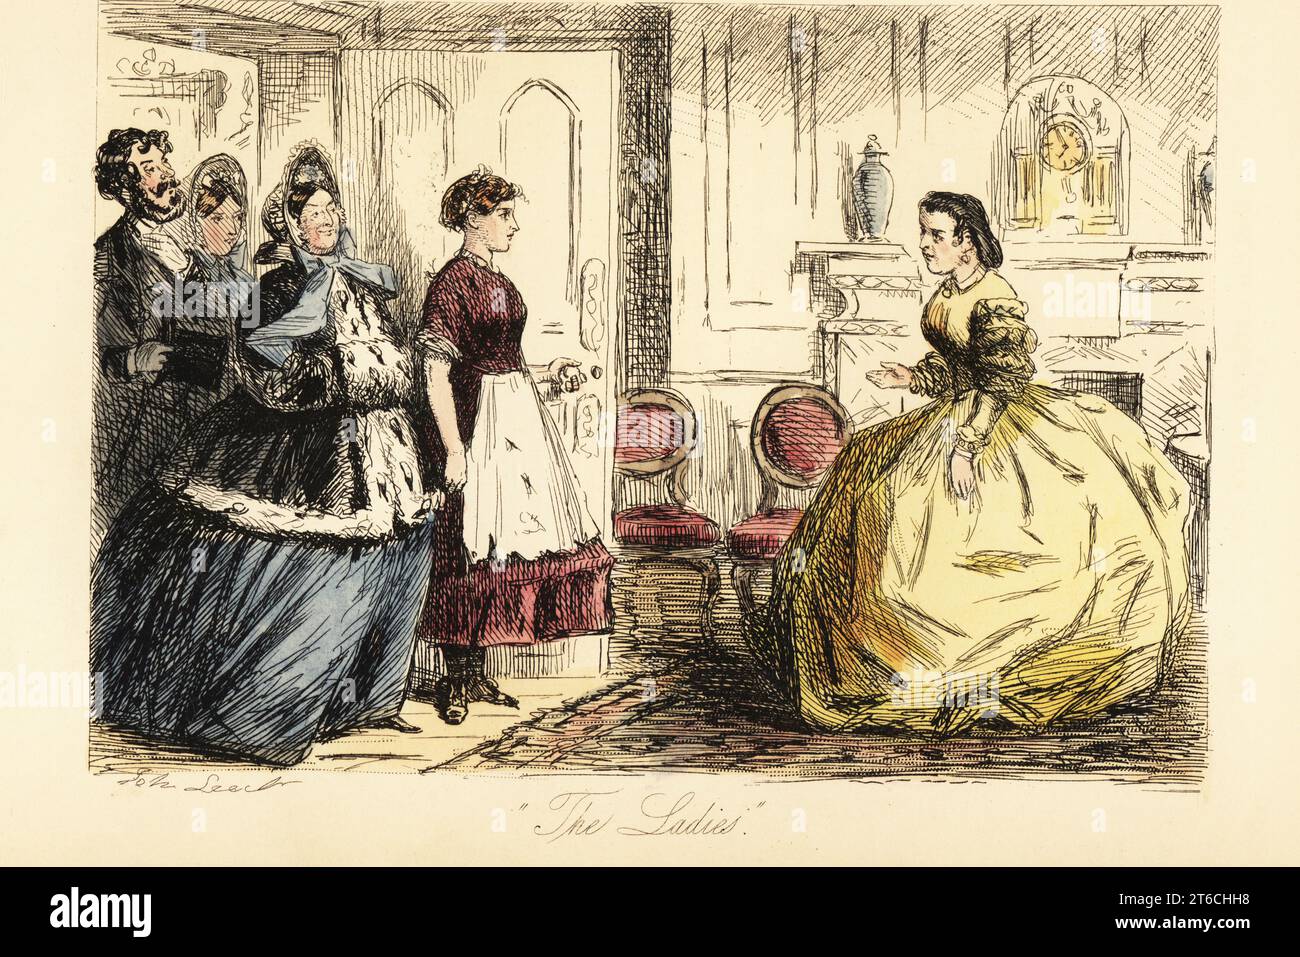 English lady receiving surprise visitors in breakfast room, 19th century. Mrs Lucy Somerville curtsies to Mrs Watkins, Mr Willie Watkins, and Miss Watkins. A maid in torn apron opens the door. The Ladies. Handcoloured steel engraving after an illustration by John Leech from Robert Smith Surtees Mr. Facey Romfords Hounds, Bradbury, Evans and Co., London, 1865. Leech (1817-1864) was an English caricaturist and illustrator best known for his work for Punch magazine. Stock Photo